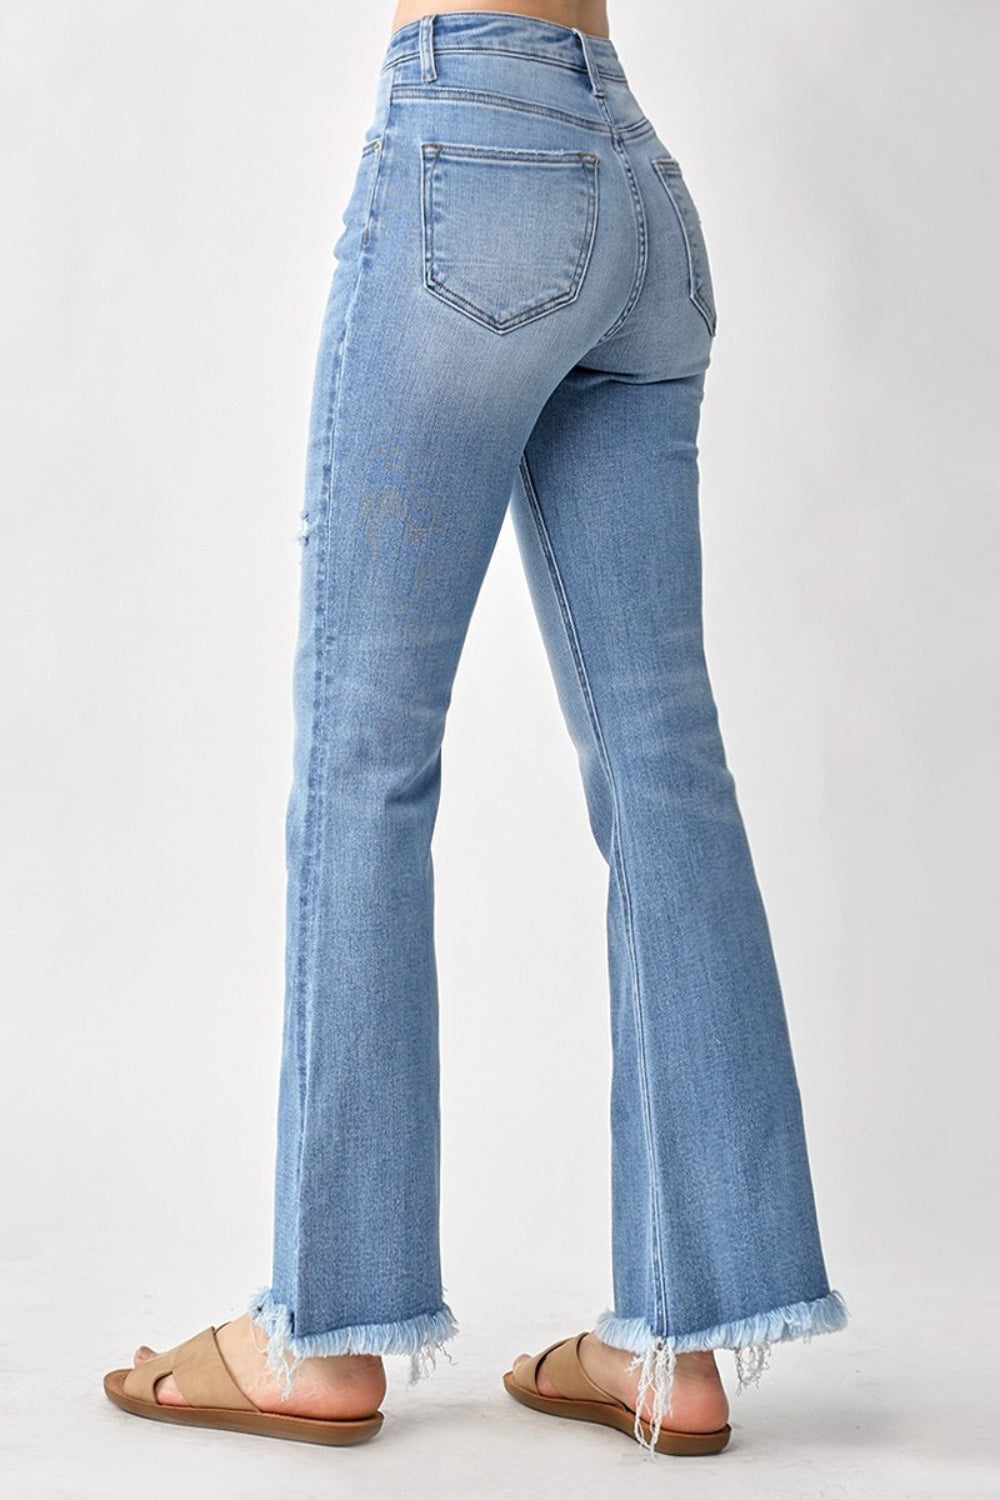 Lavender RISEN High Rise Frayed Hem Bootcut Jeans Sentient Beauty Fashions Apparel & Accessories